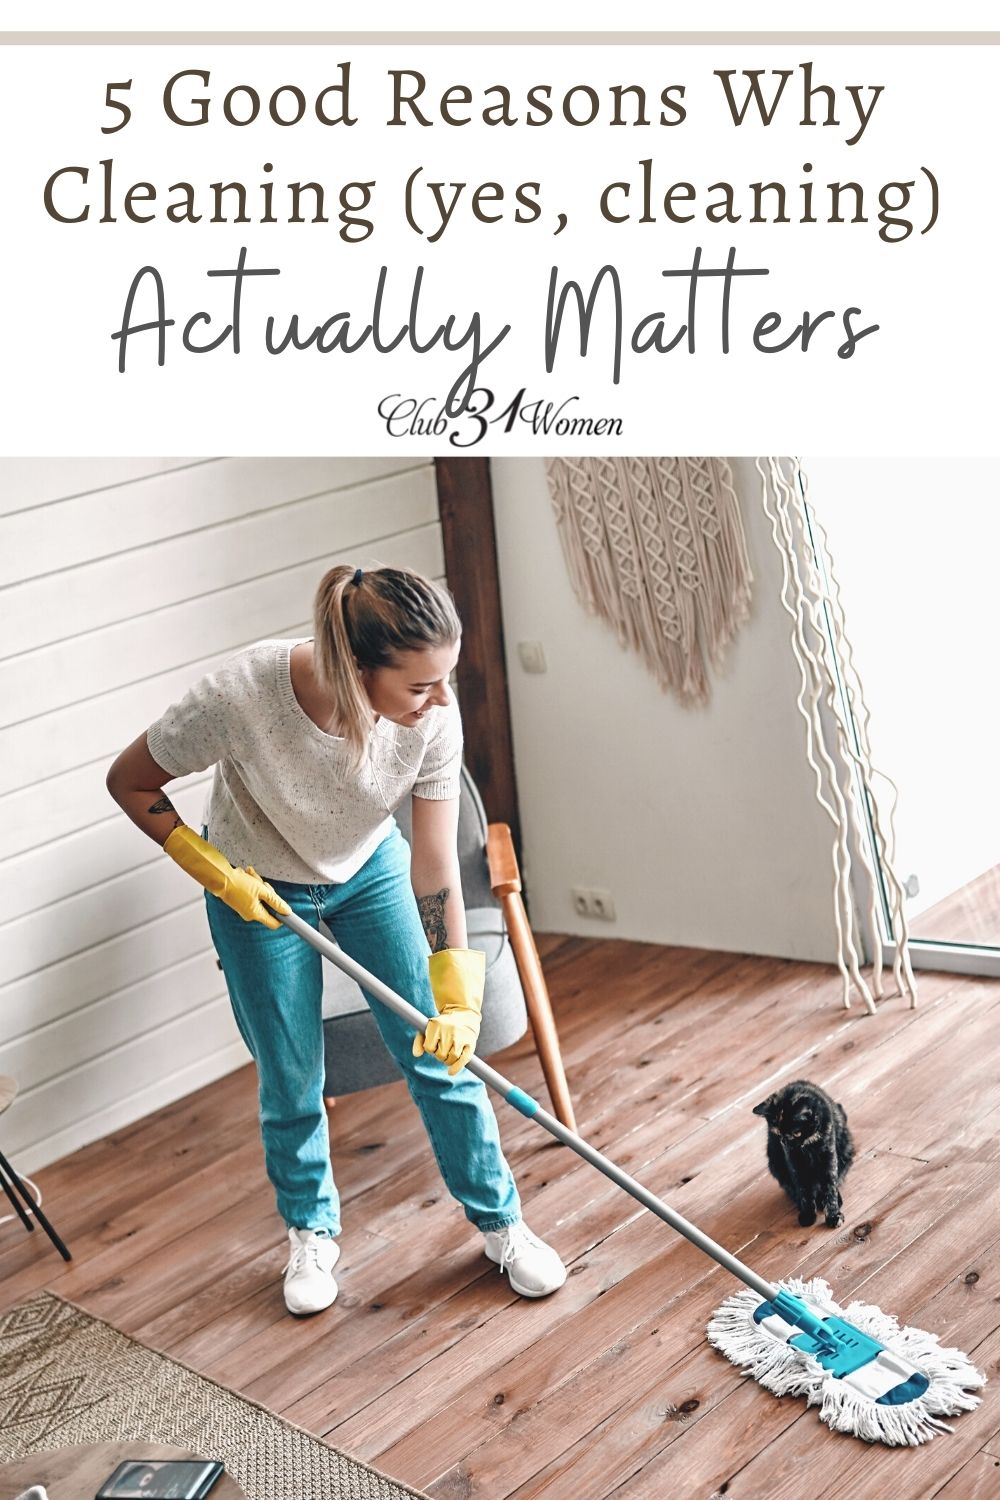 5 Good Reasons Why Cleaning (yes, cleaning) Actually Matters via @Club31Women